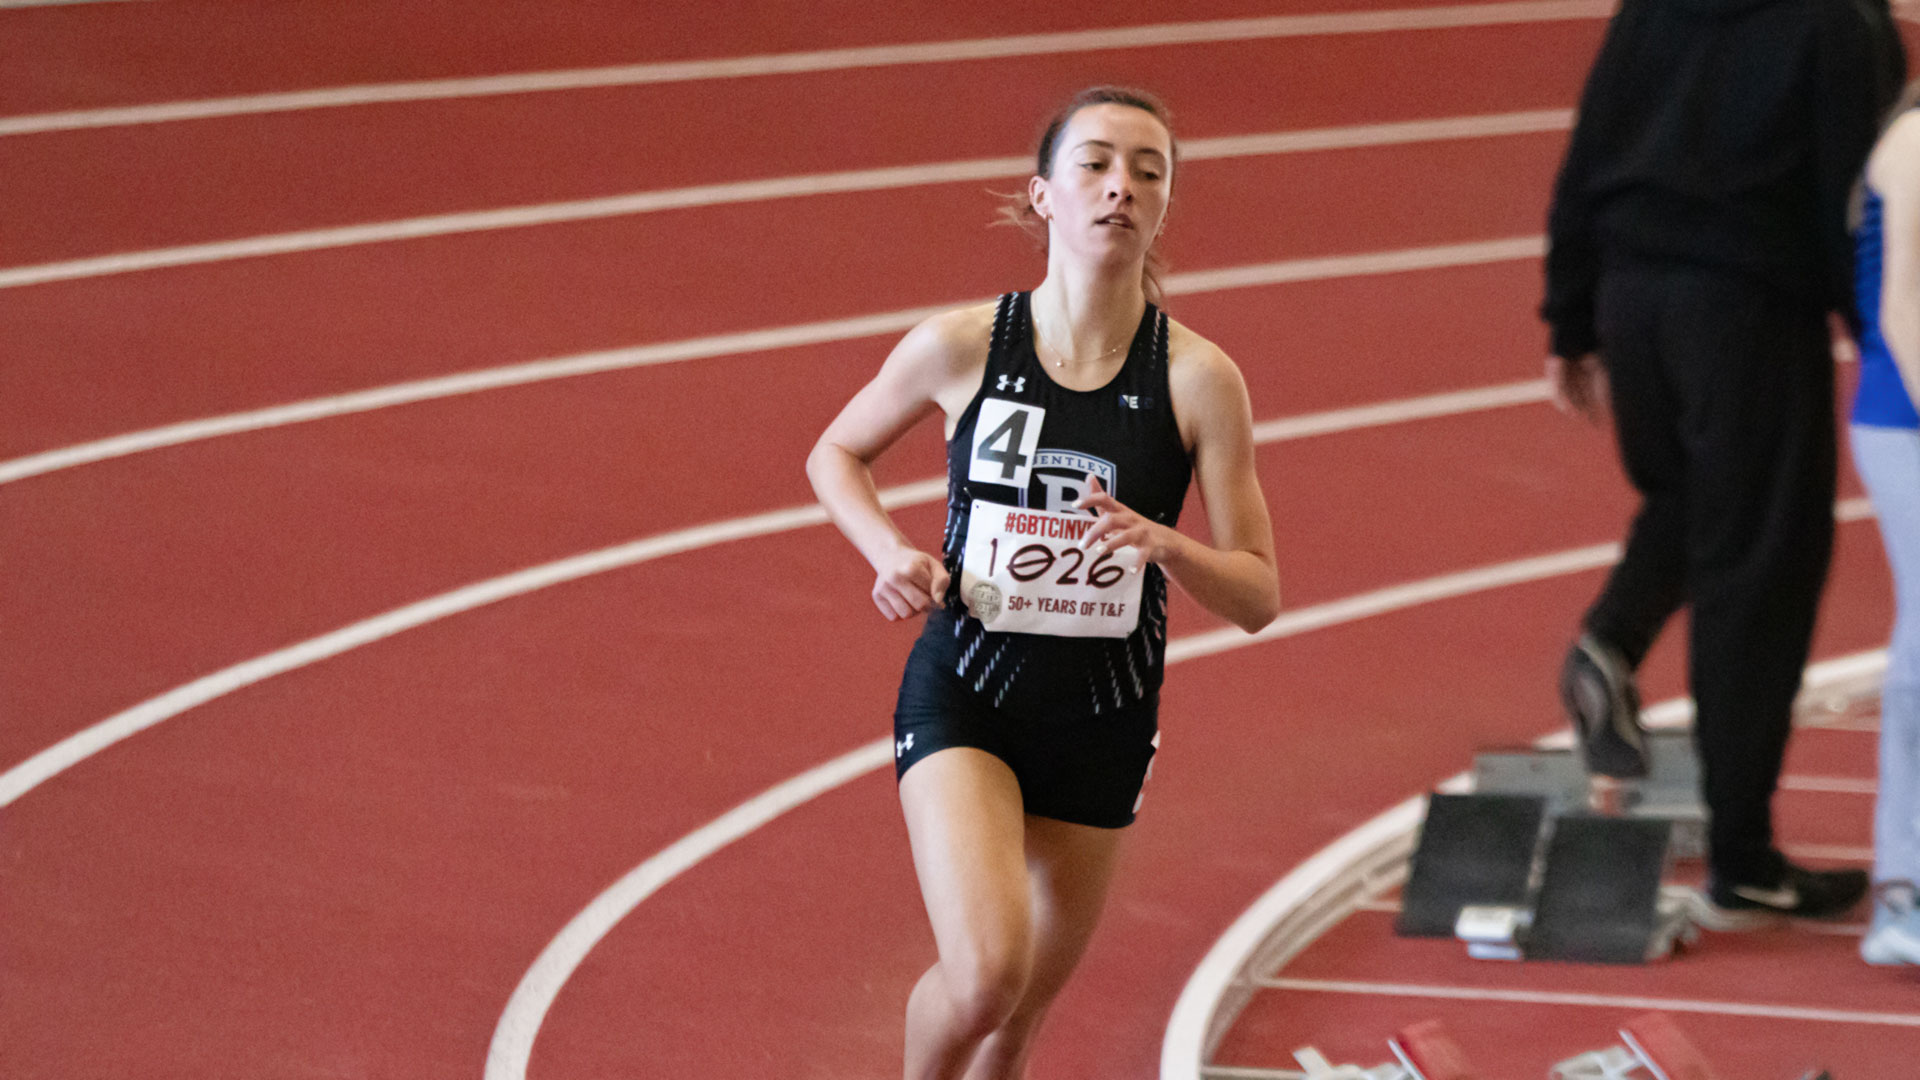 Burmester and Capece both place top-10 in women's mile